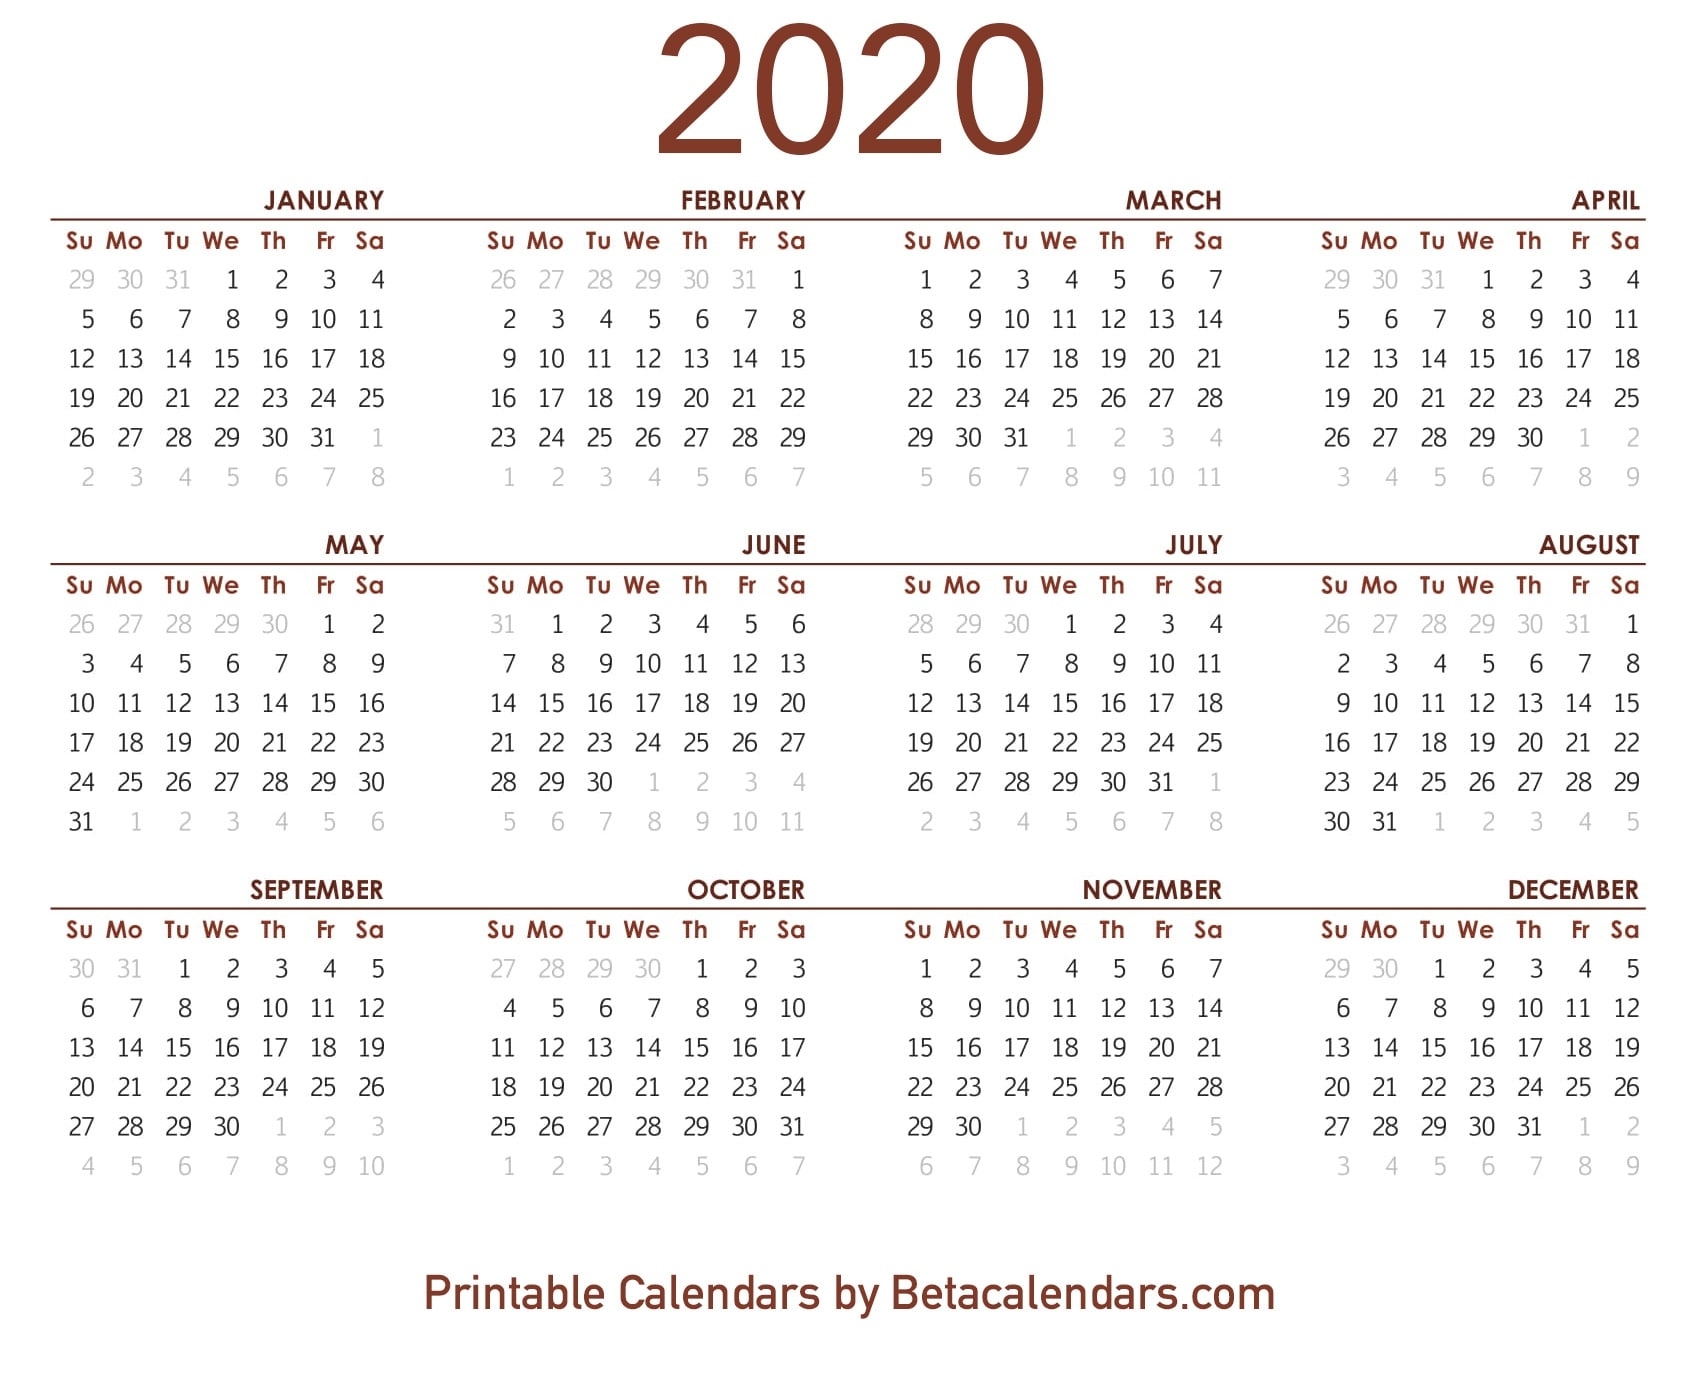 2020 Calendar - Beta Calendars intended for Special Days In 2020 That Are Not Down On Calender